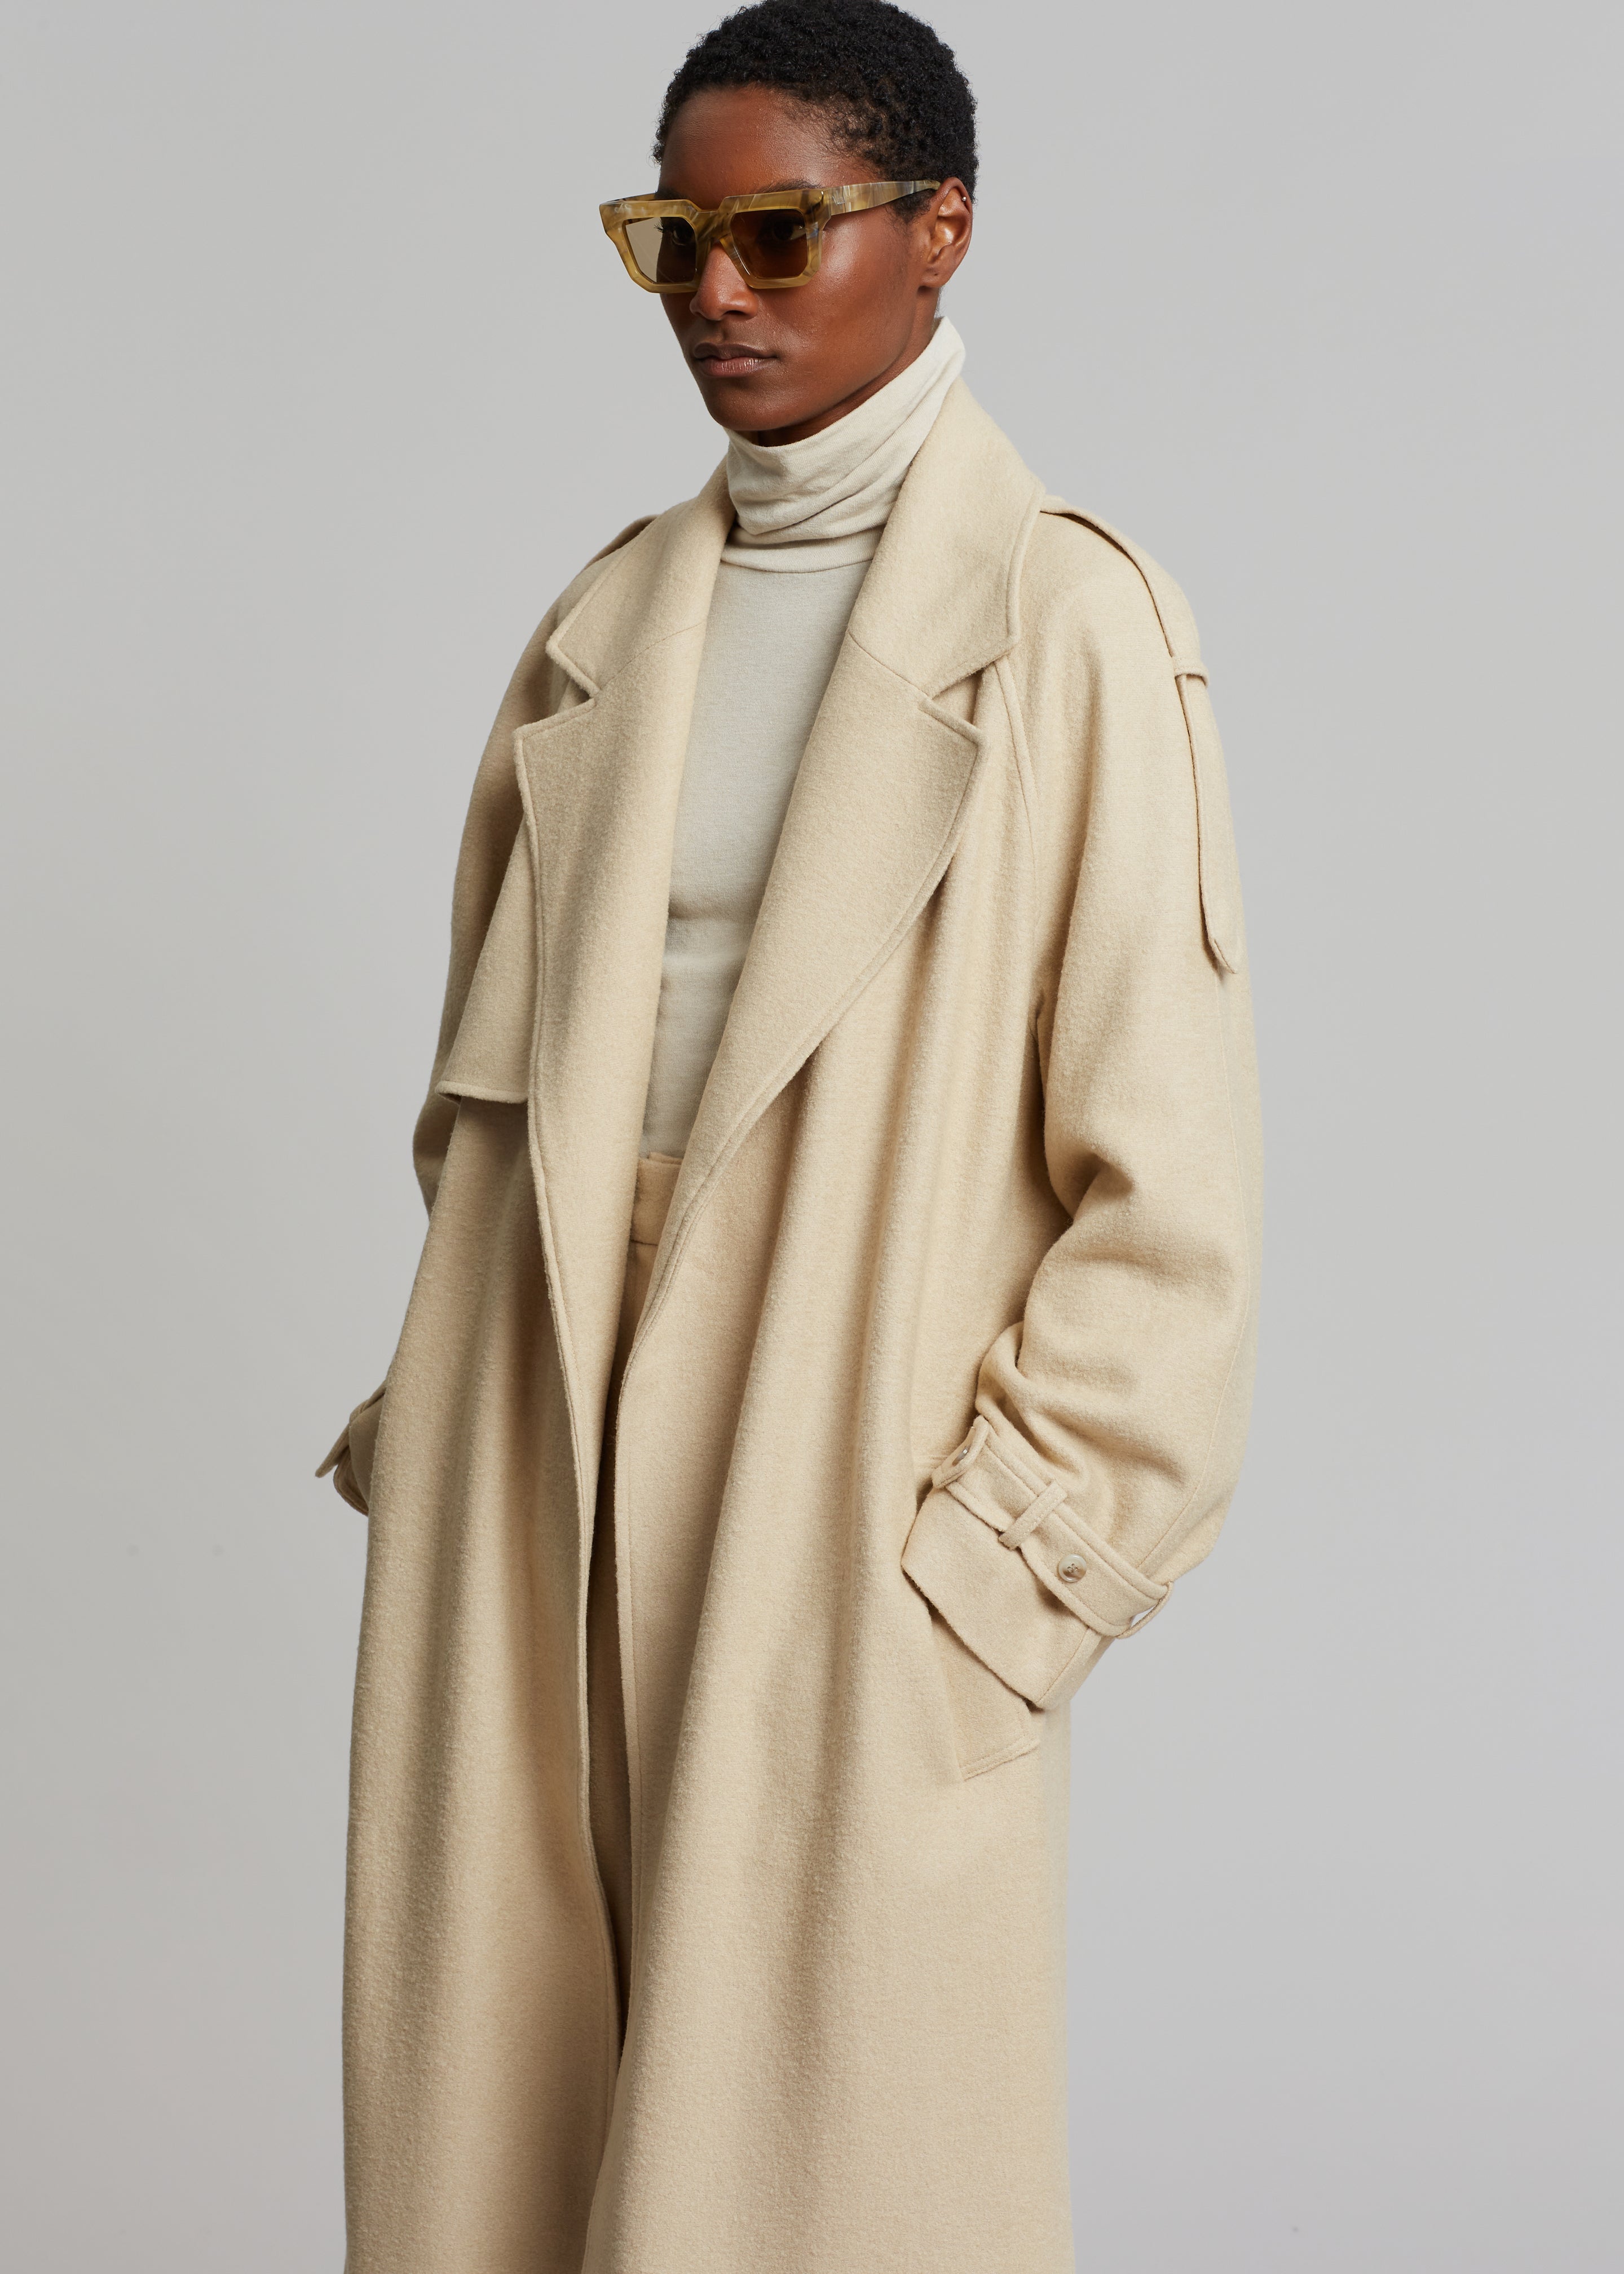 Suzanne Boiled Wool Trench Coat - Beige - 7